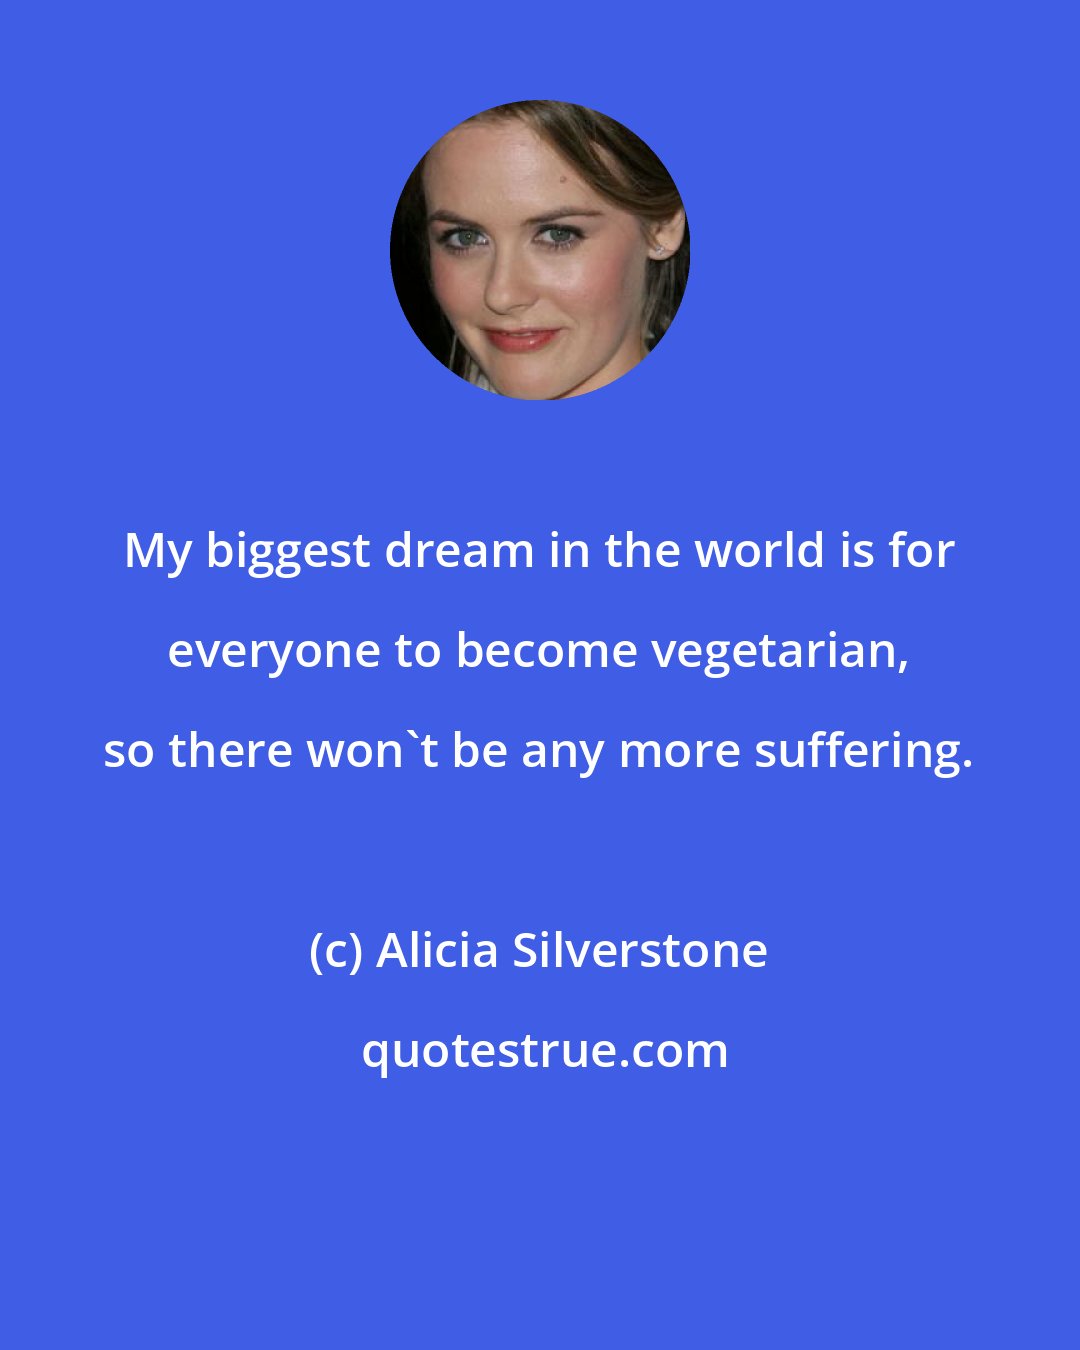 Alicia Silverstone: My biggest dream in the world is for everyone to become vegetarian, so there won't be any more suffering.